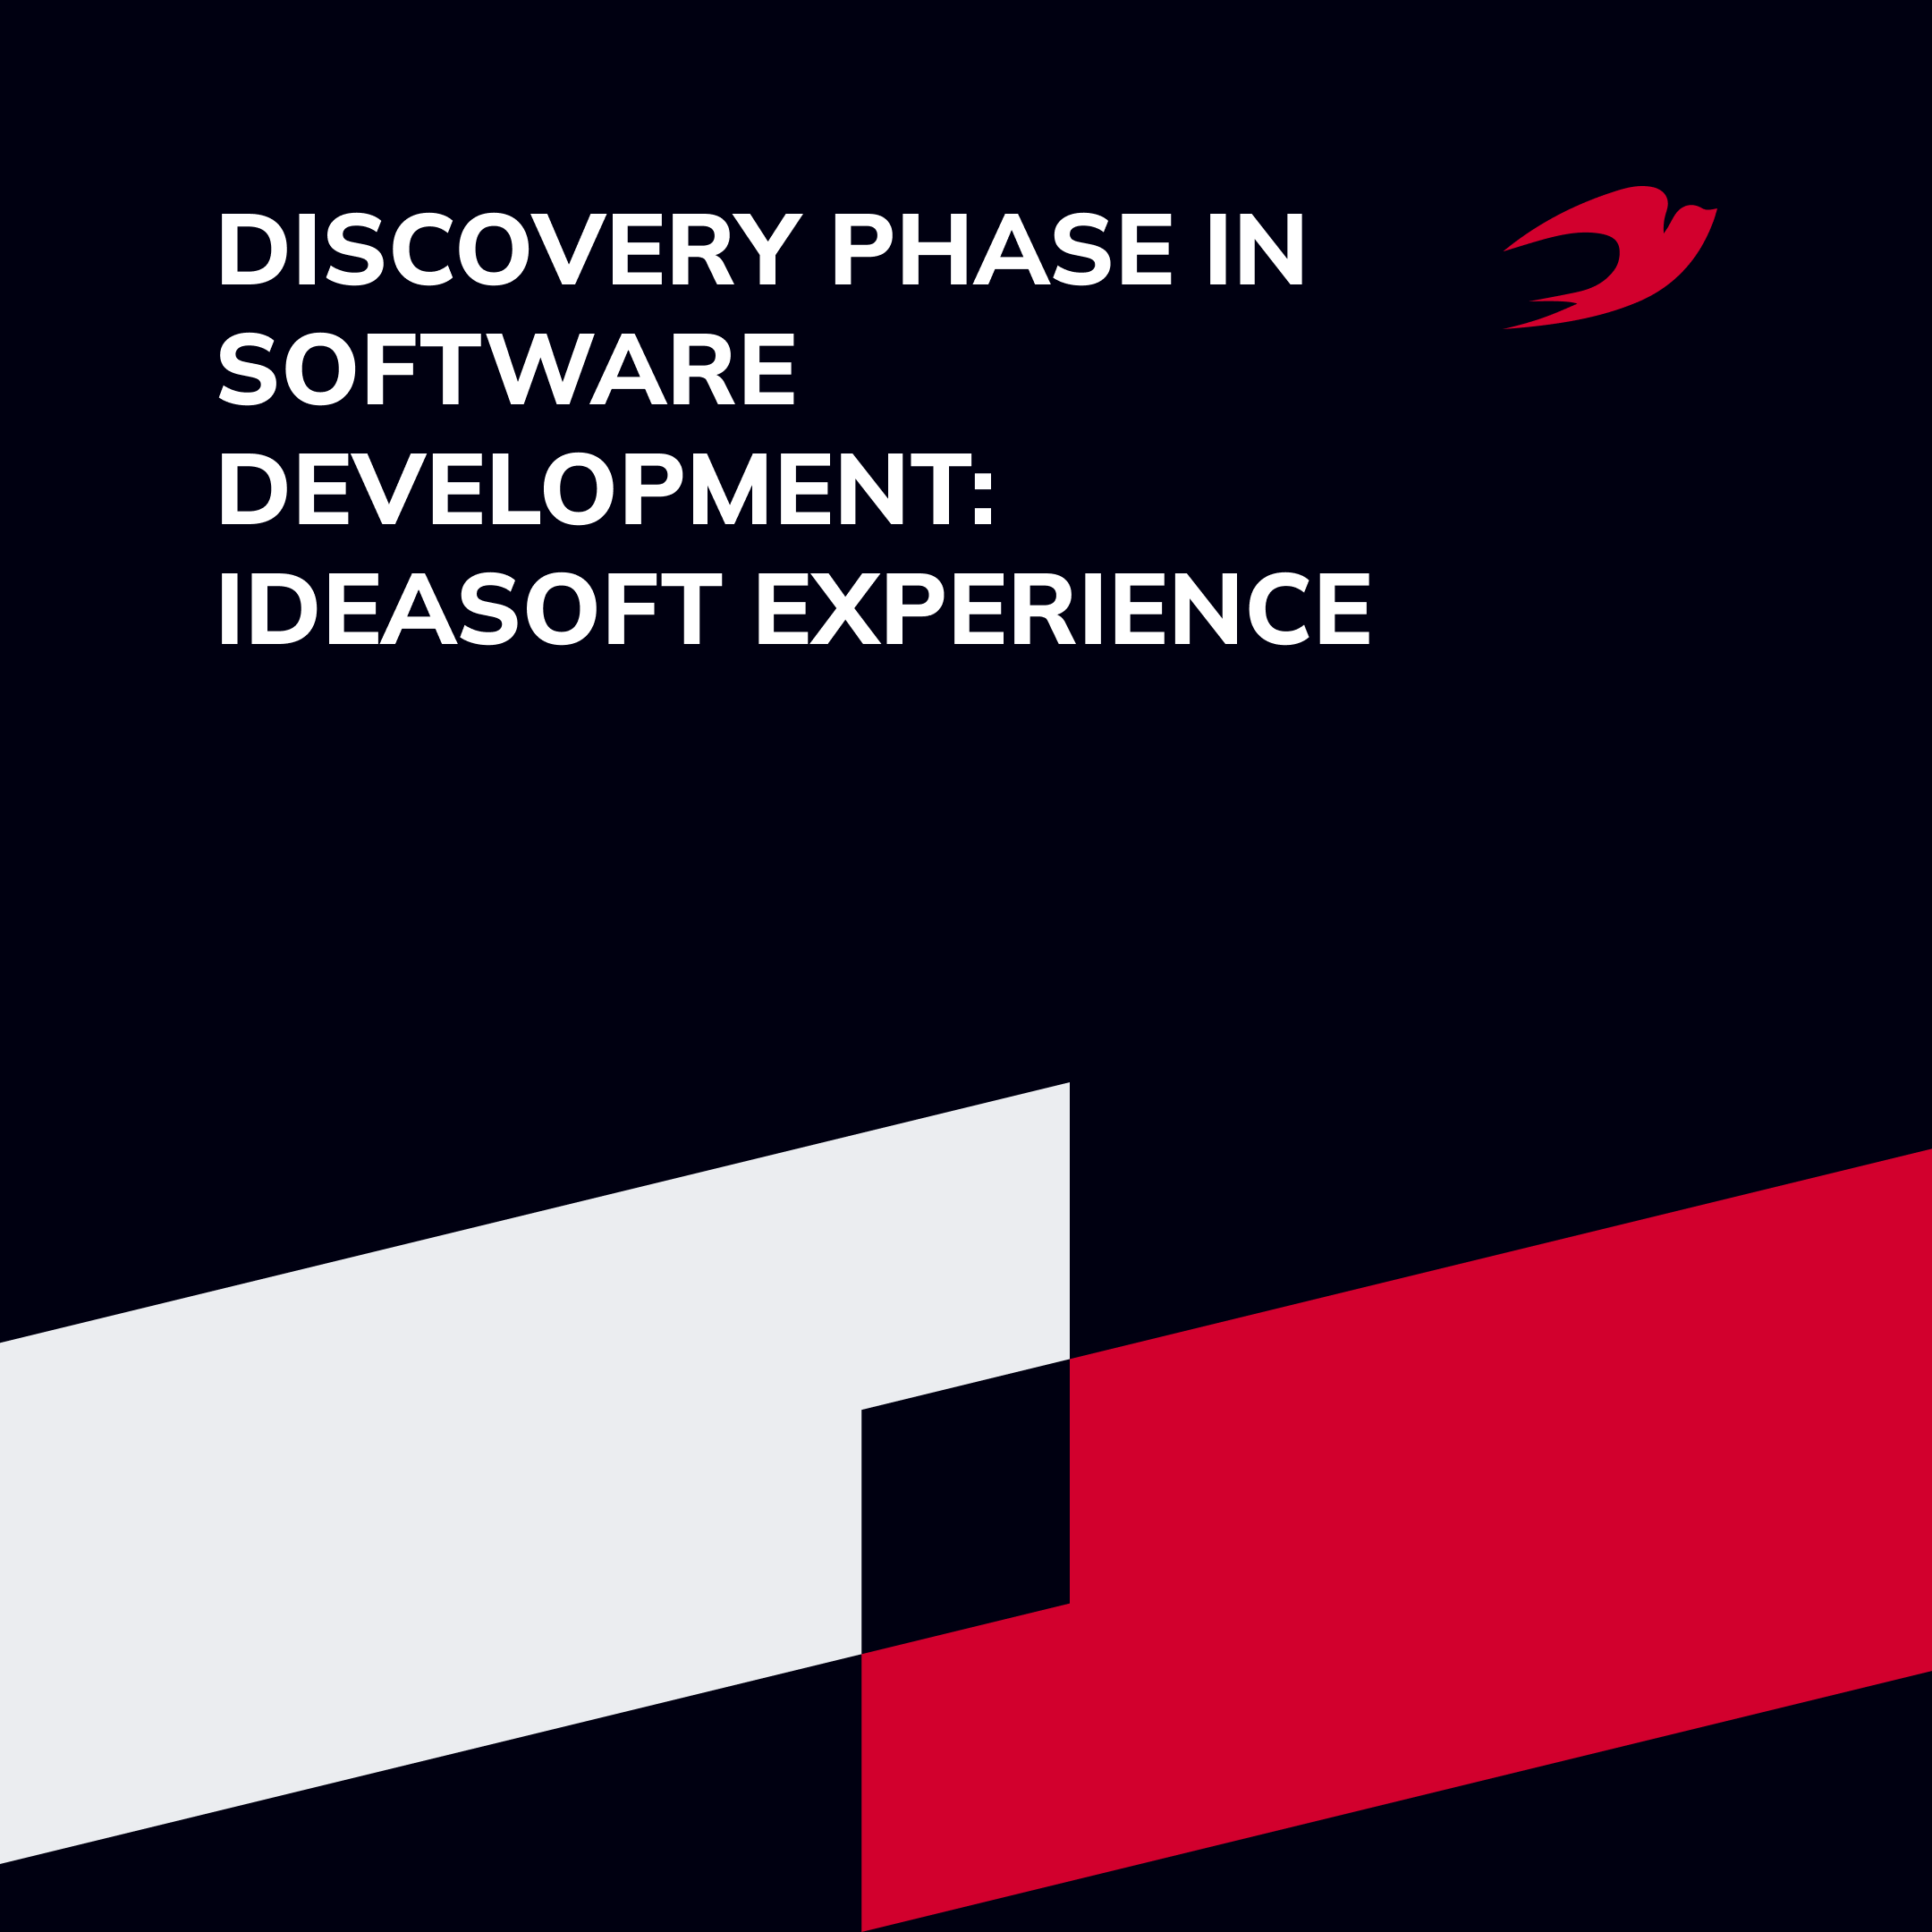 Discovery Phase in Software Development: IdeaSoft Experience